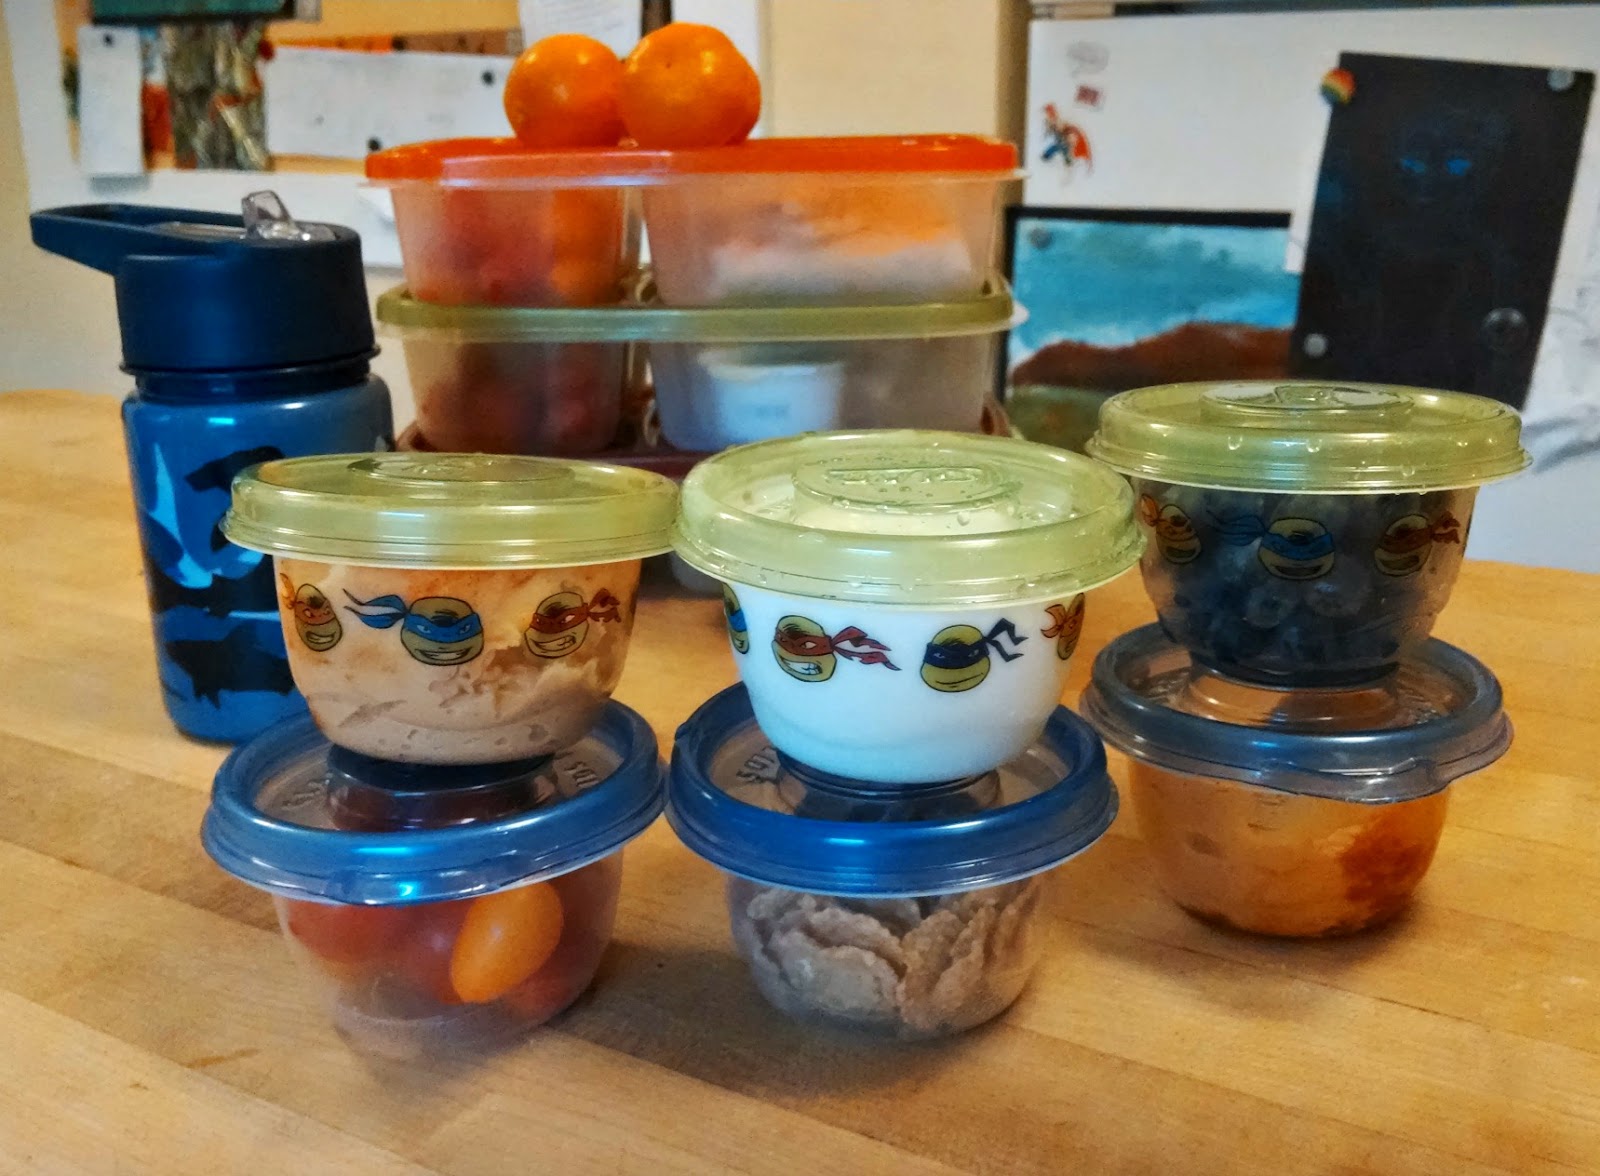 Bonggamom Finds: School lunches are easy and fun with Glad's